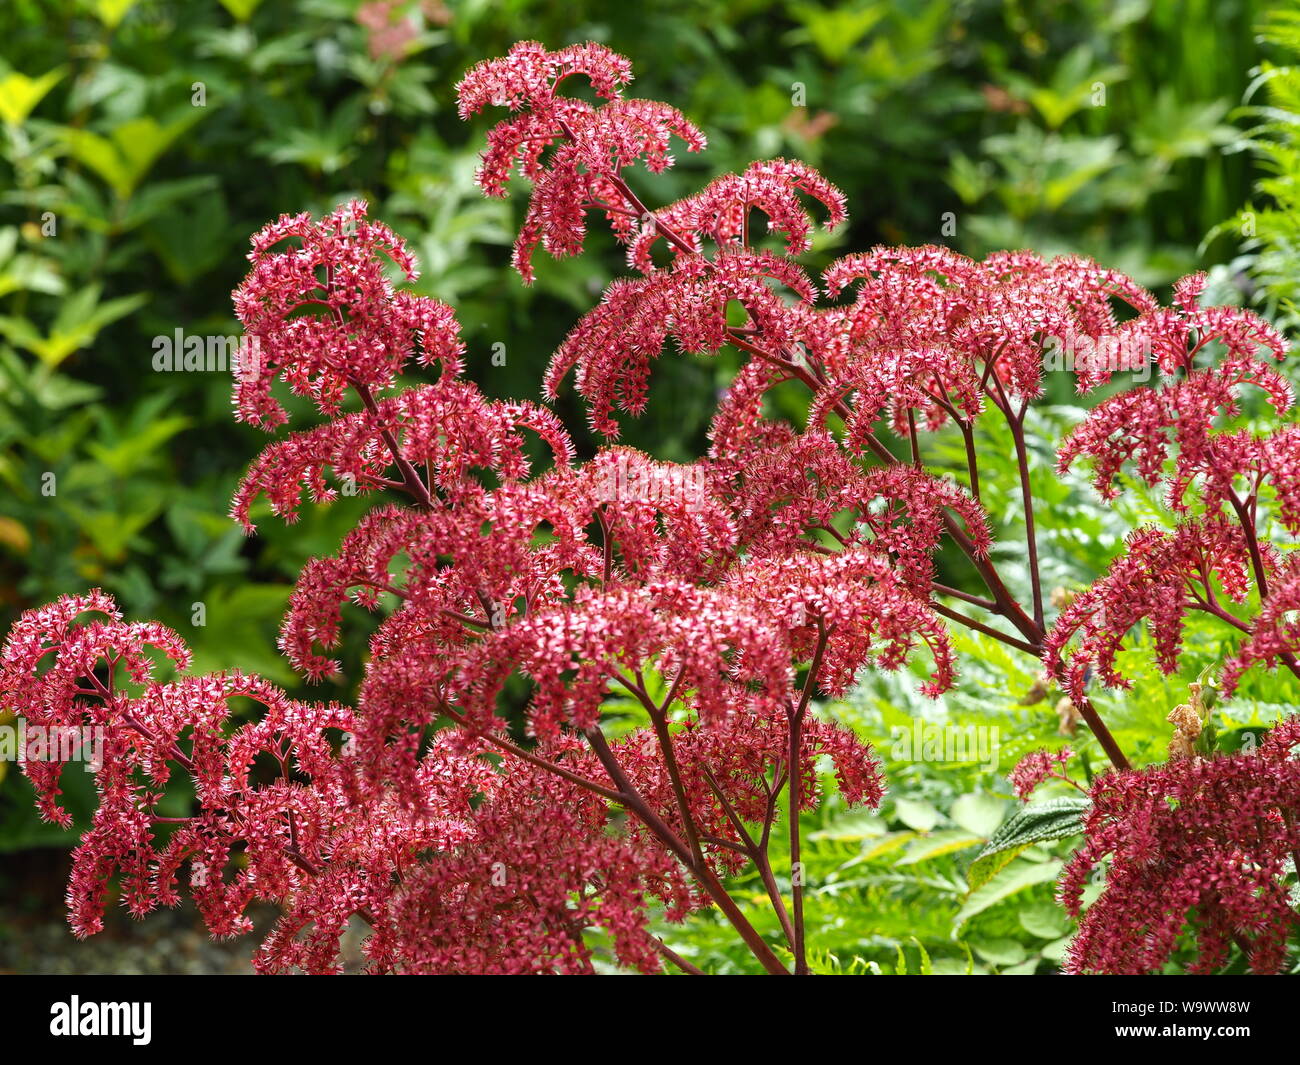 Lovely pink Rodgersia pinnata flowers catching the sunlight in a garden Stock Photo